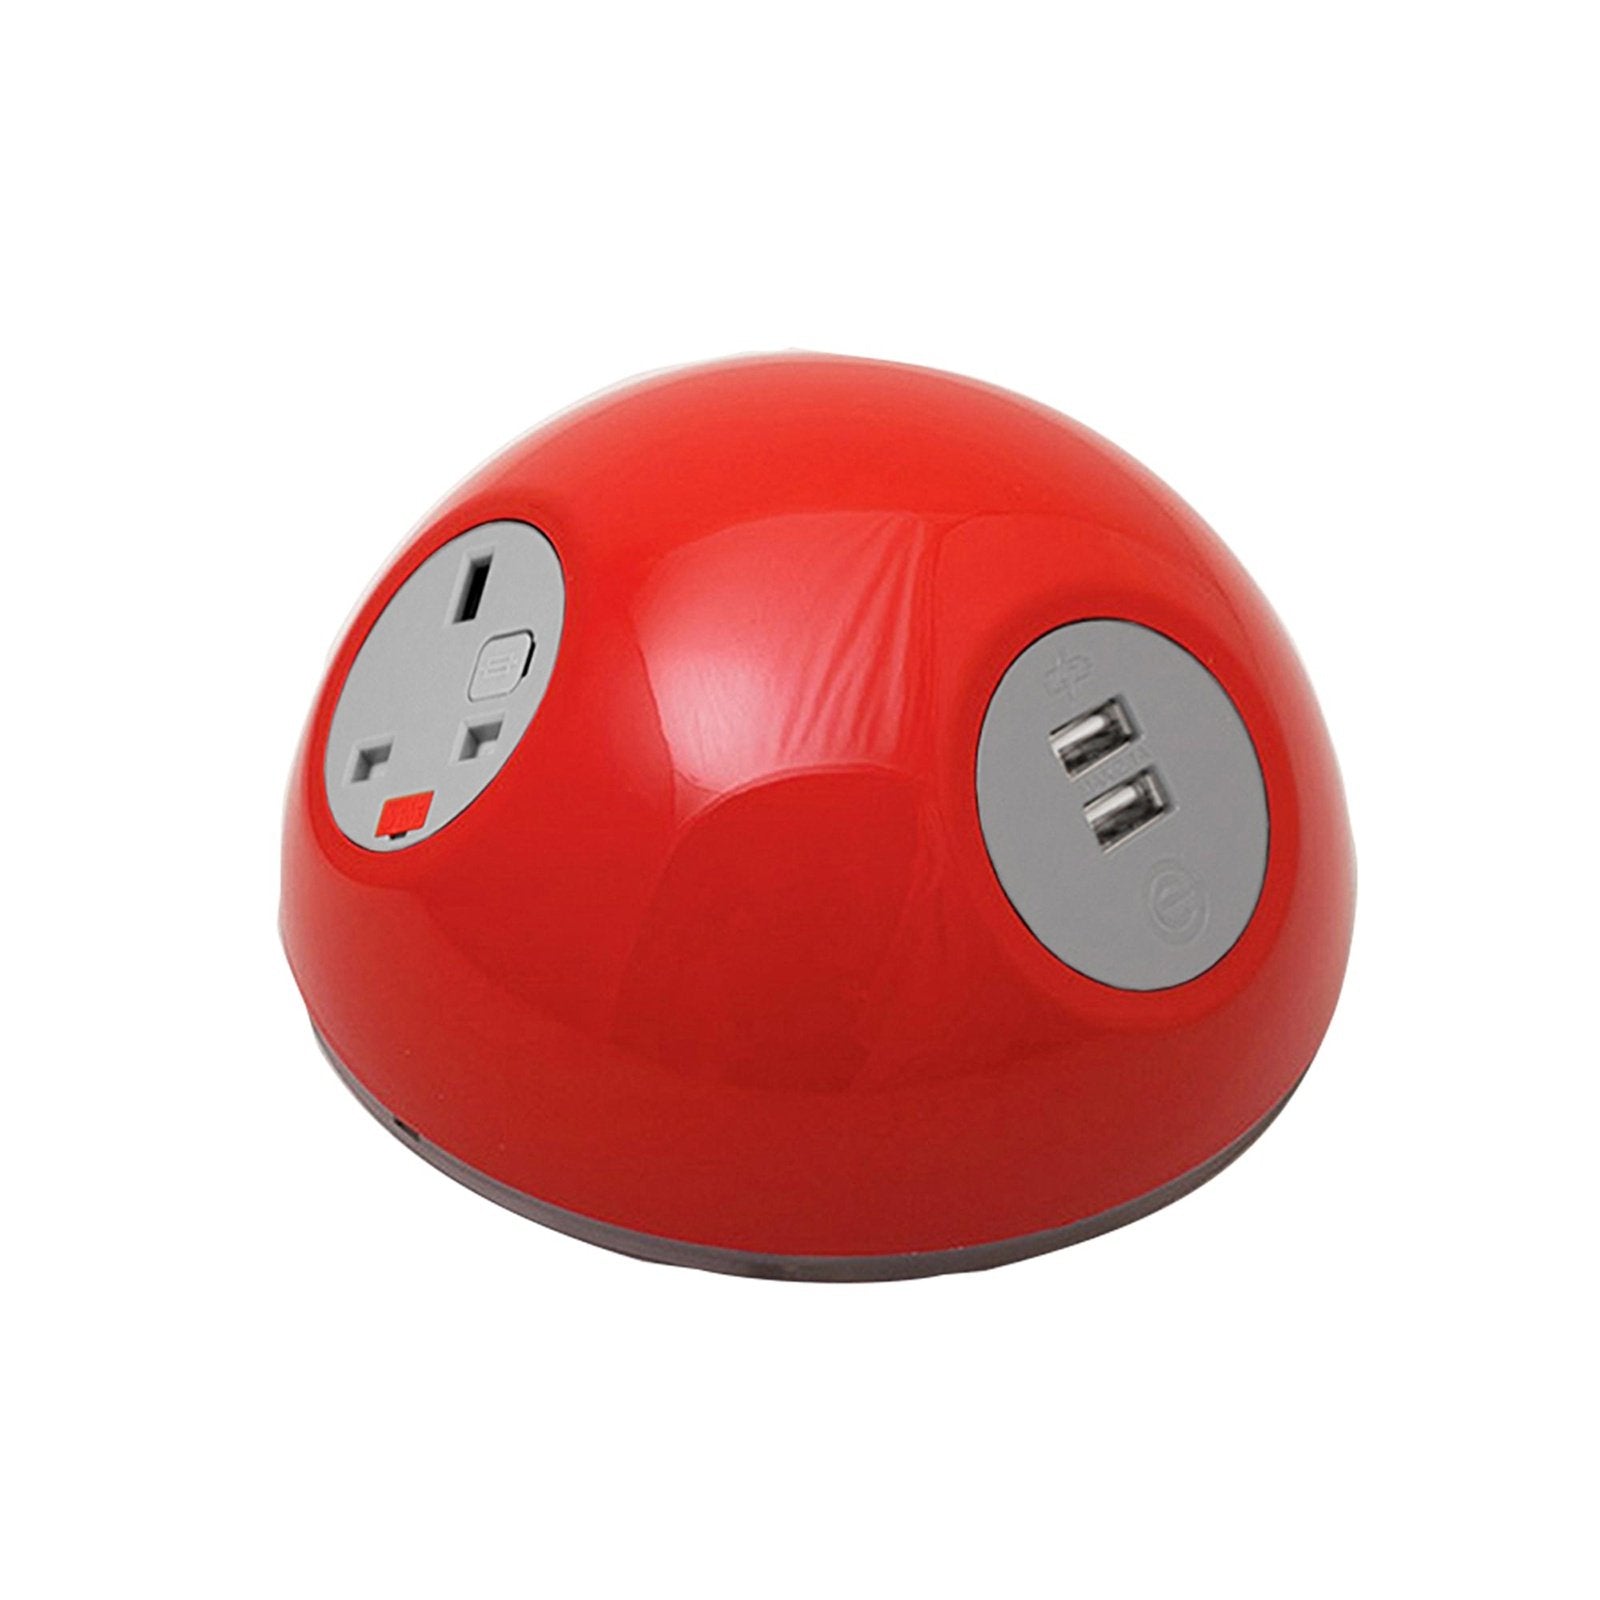 Pluto domed on-surface power module with UK socket, 1 x TUF A&C connectors USB charger - Office Products Online